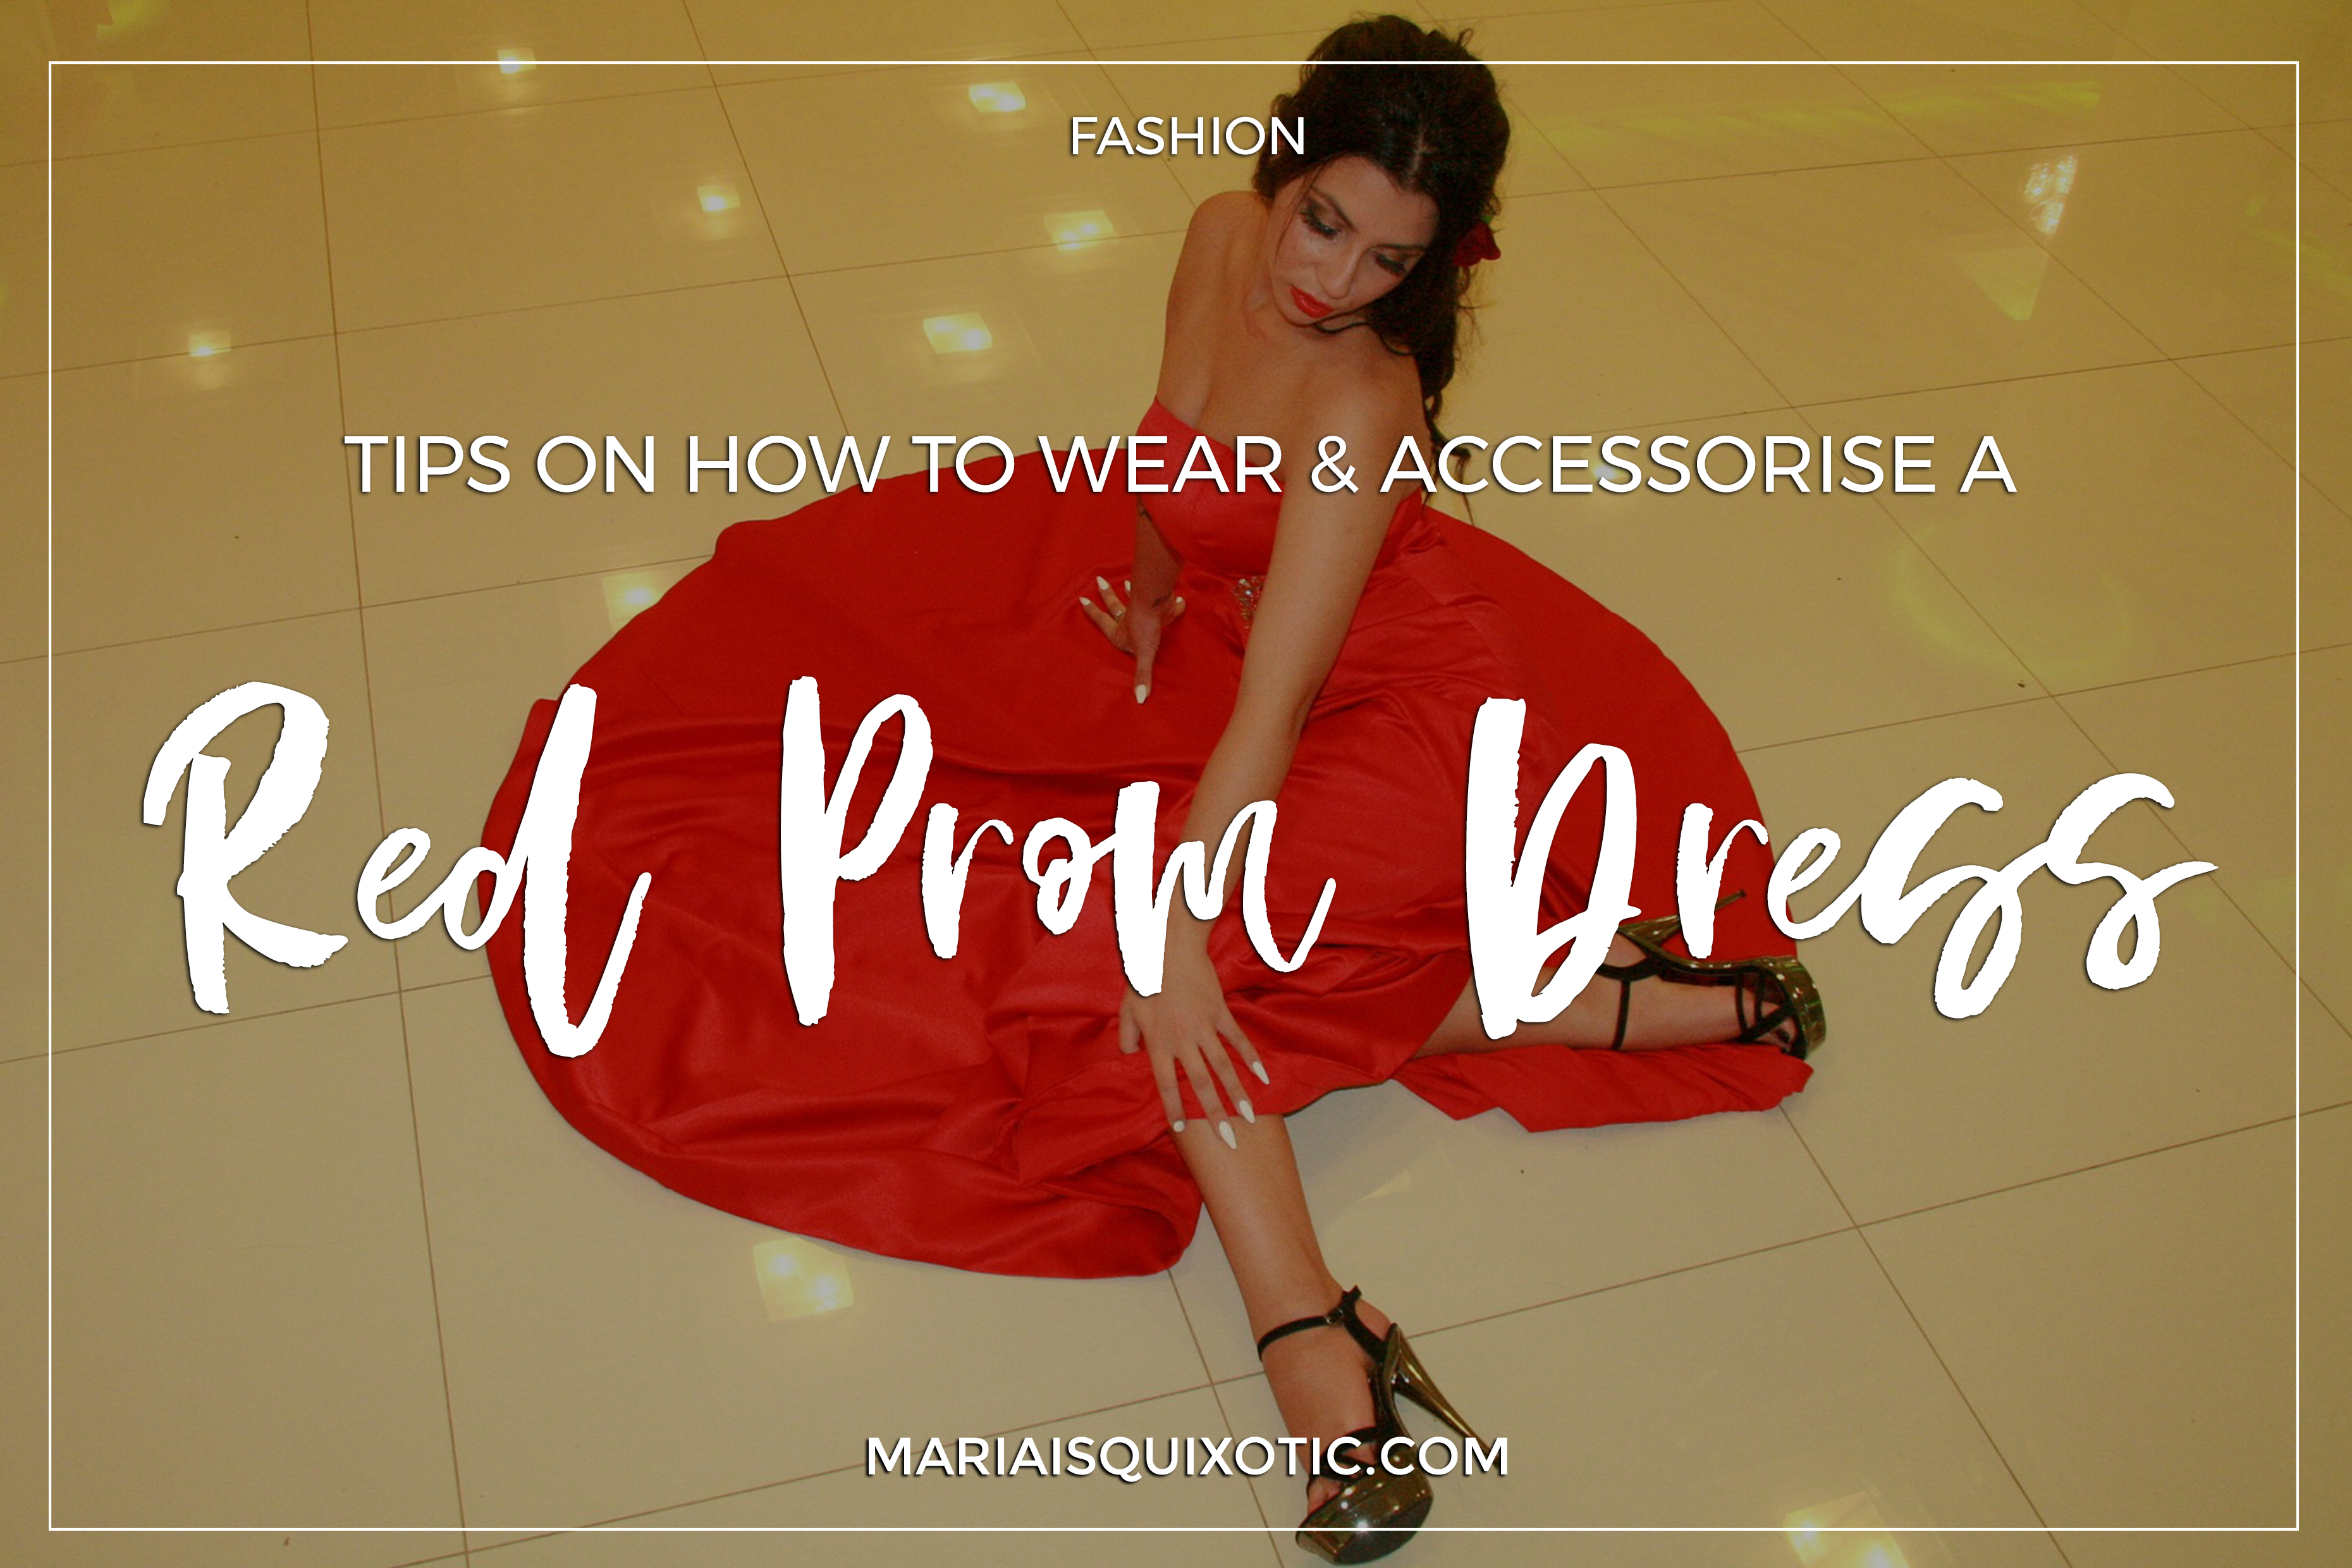 Tips On How To Wear & Accessorise A Red Prom Dress